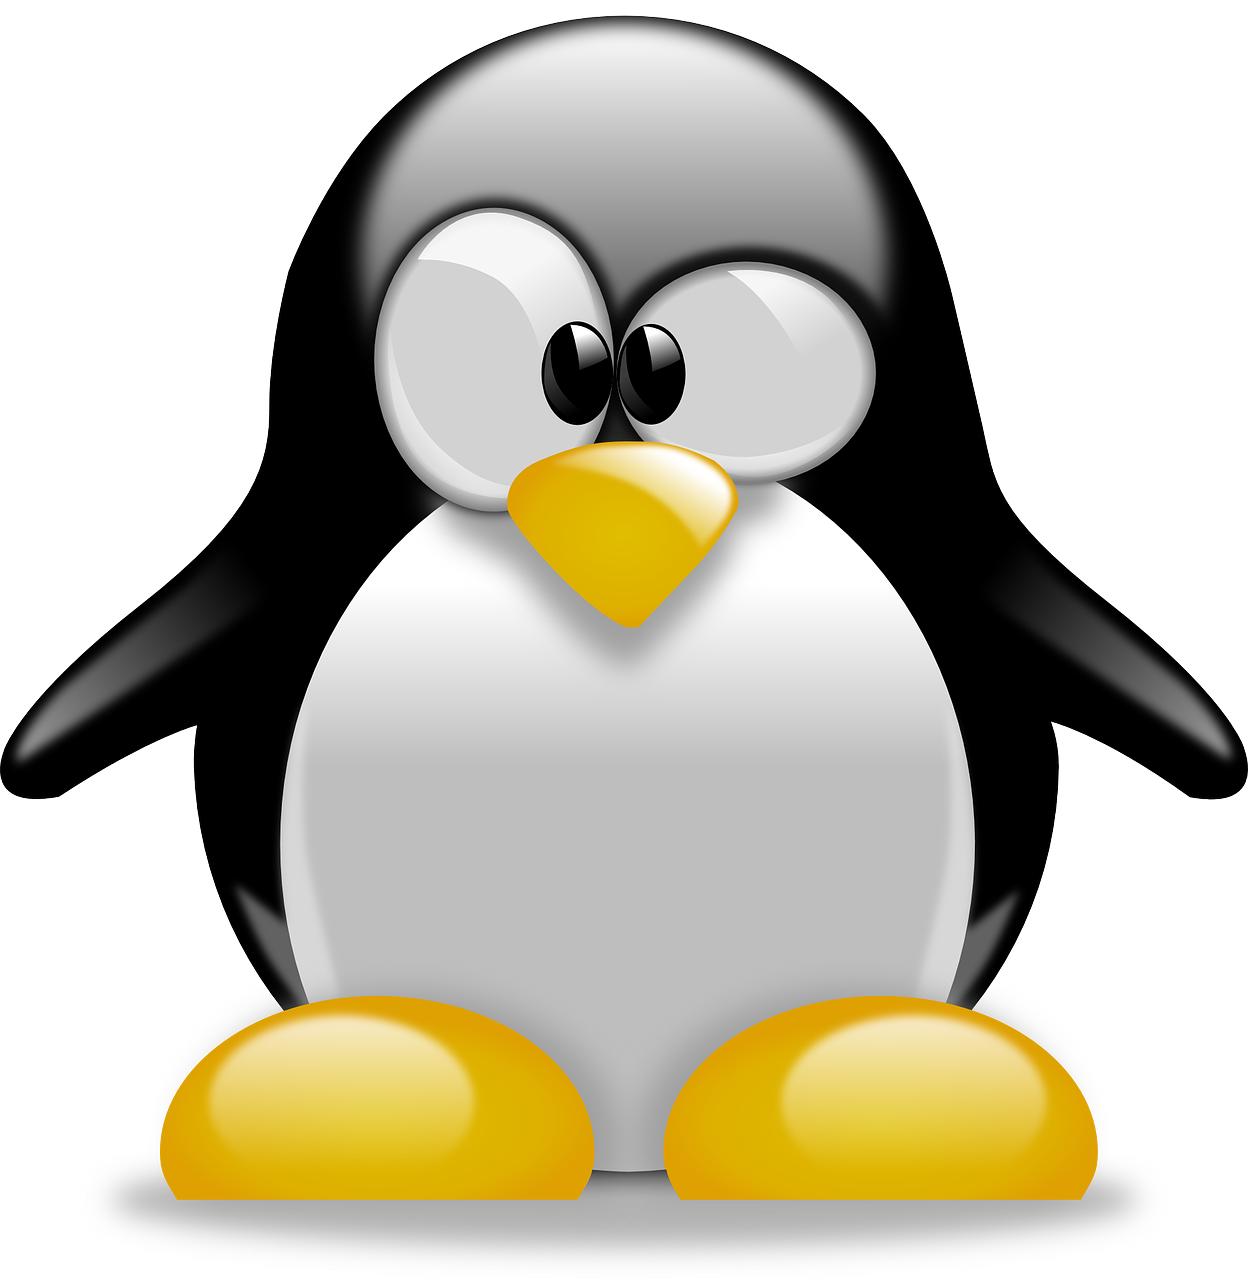 Linux Commands for Cloud Engineers